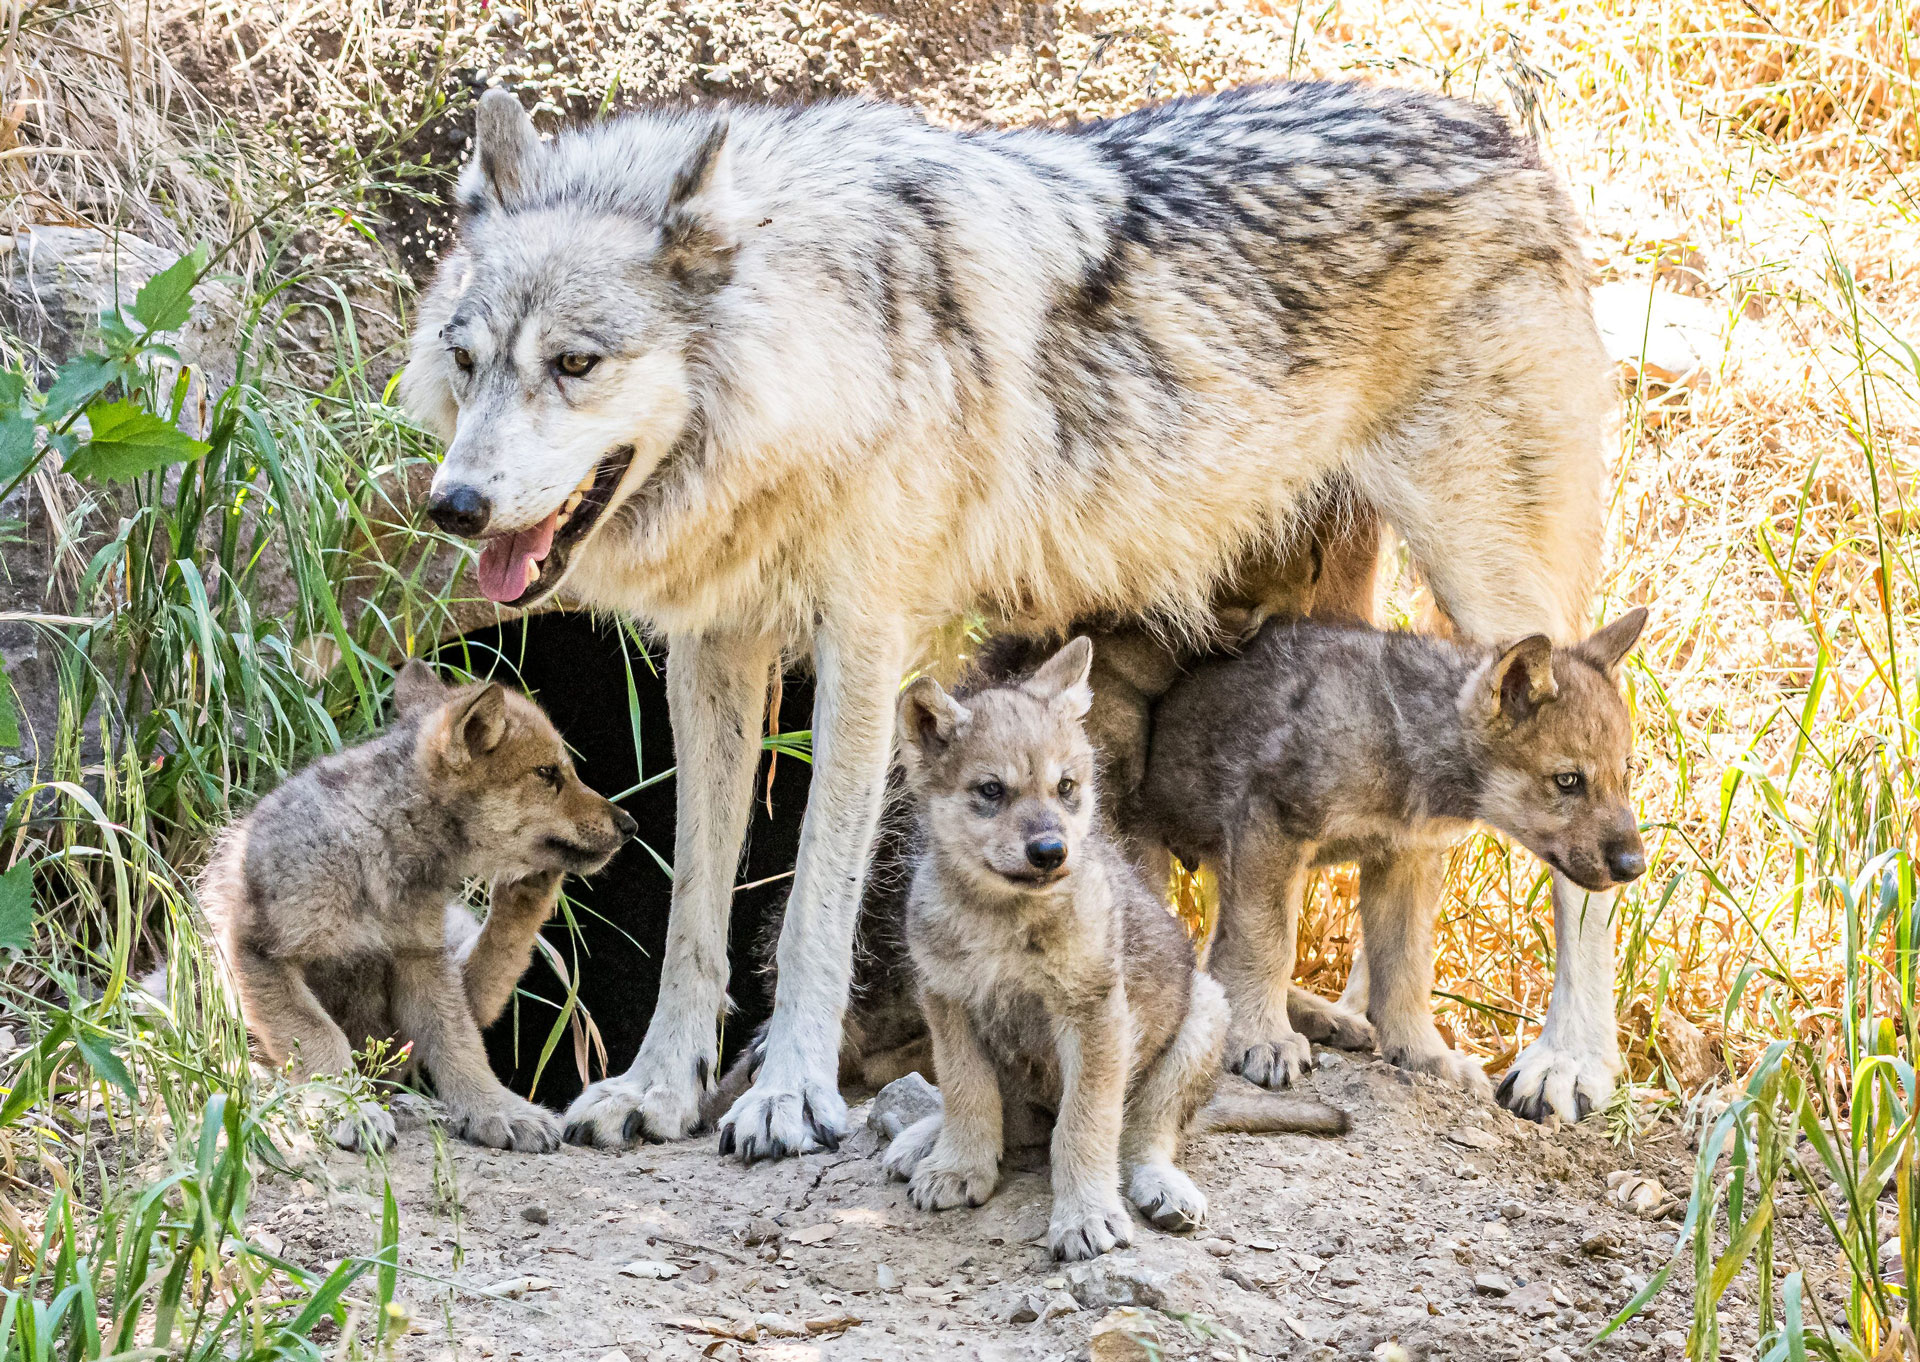 wolf-pups-emerge-from-den-at-oakland-zoo-to-begin-goodwill-mission-kqed